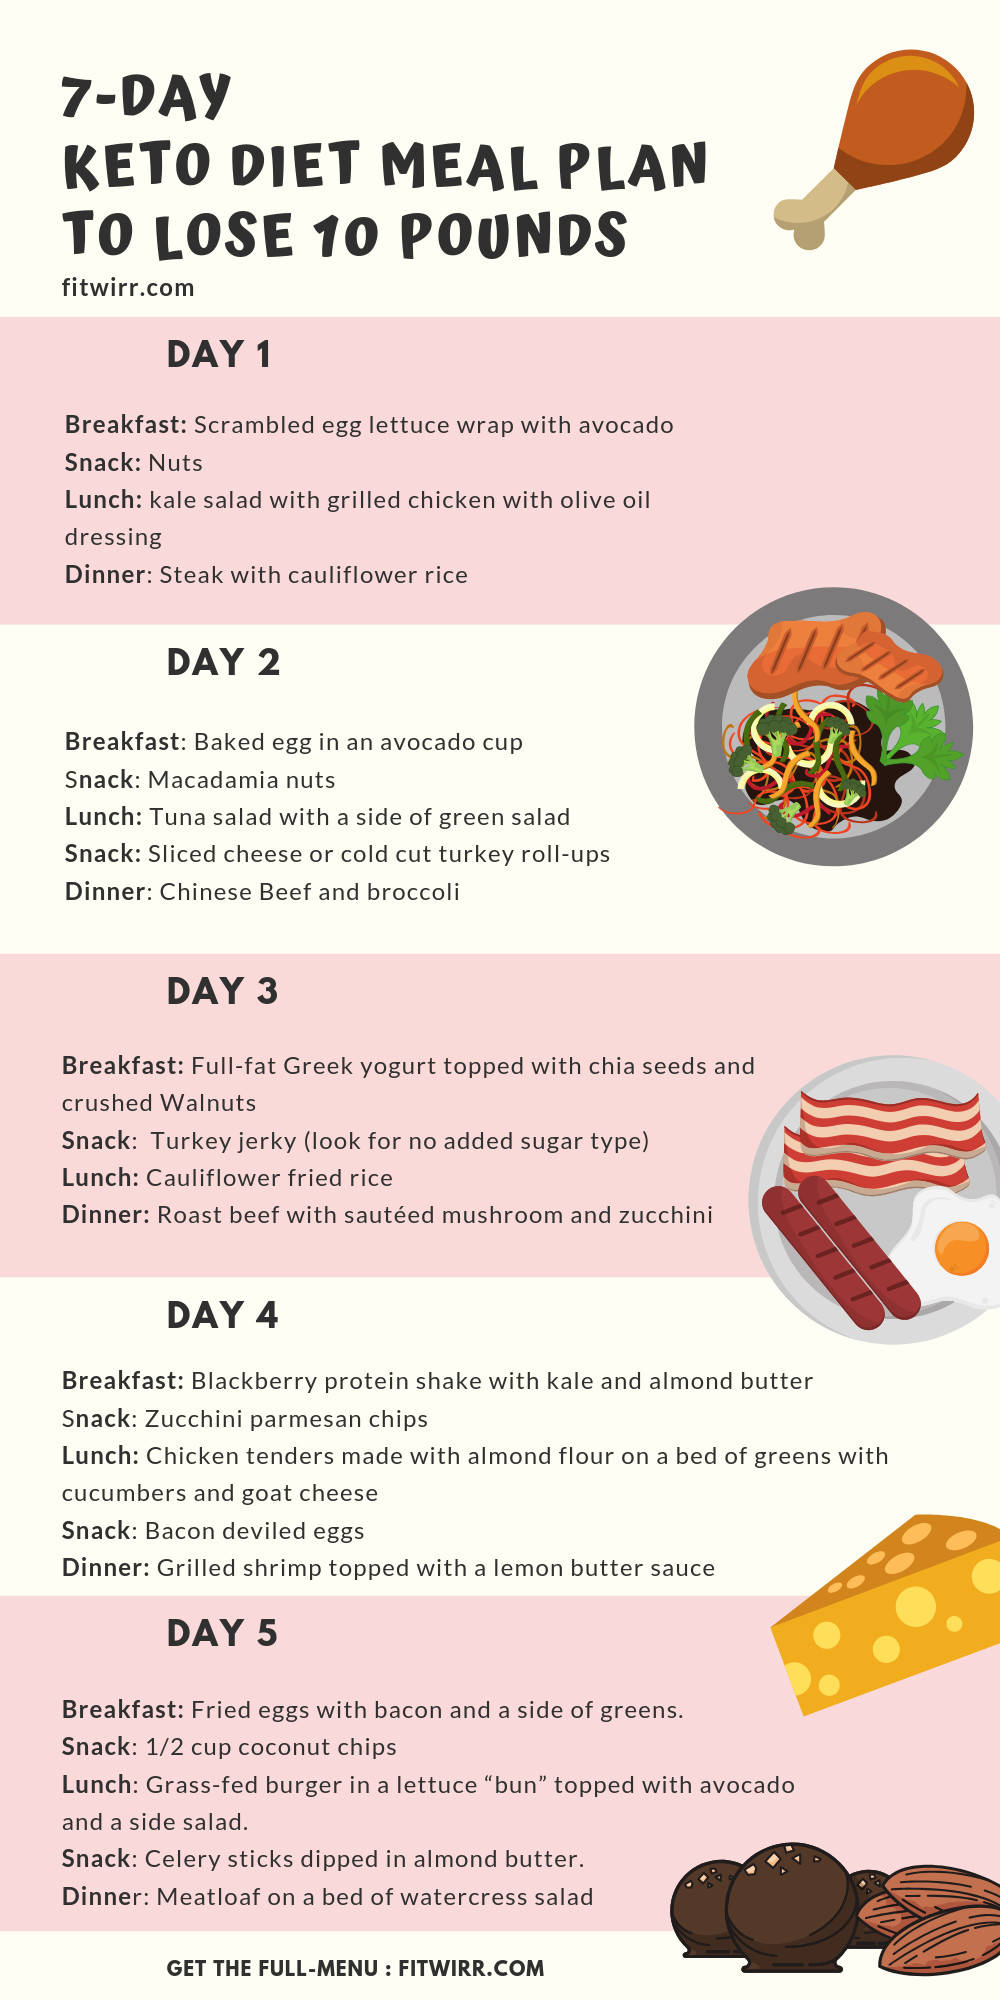 Keto Diet For Beginners Keto Diet For Beginners Losing Weight
 Keto Diet Menu 7 Day Keto Meal Plan for Beginners to Lose